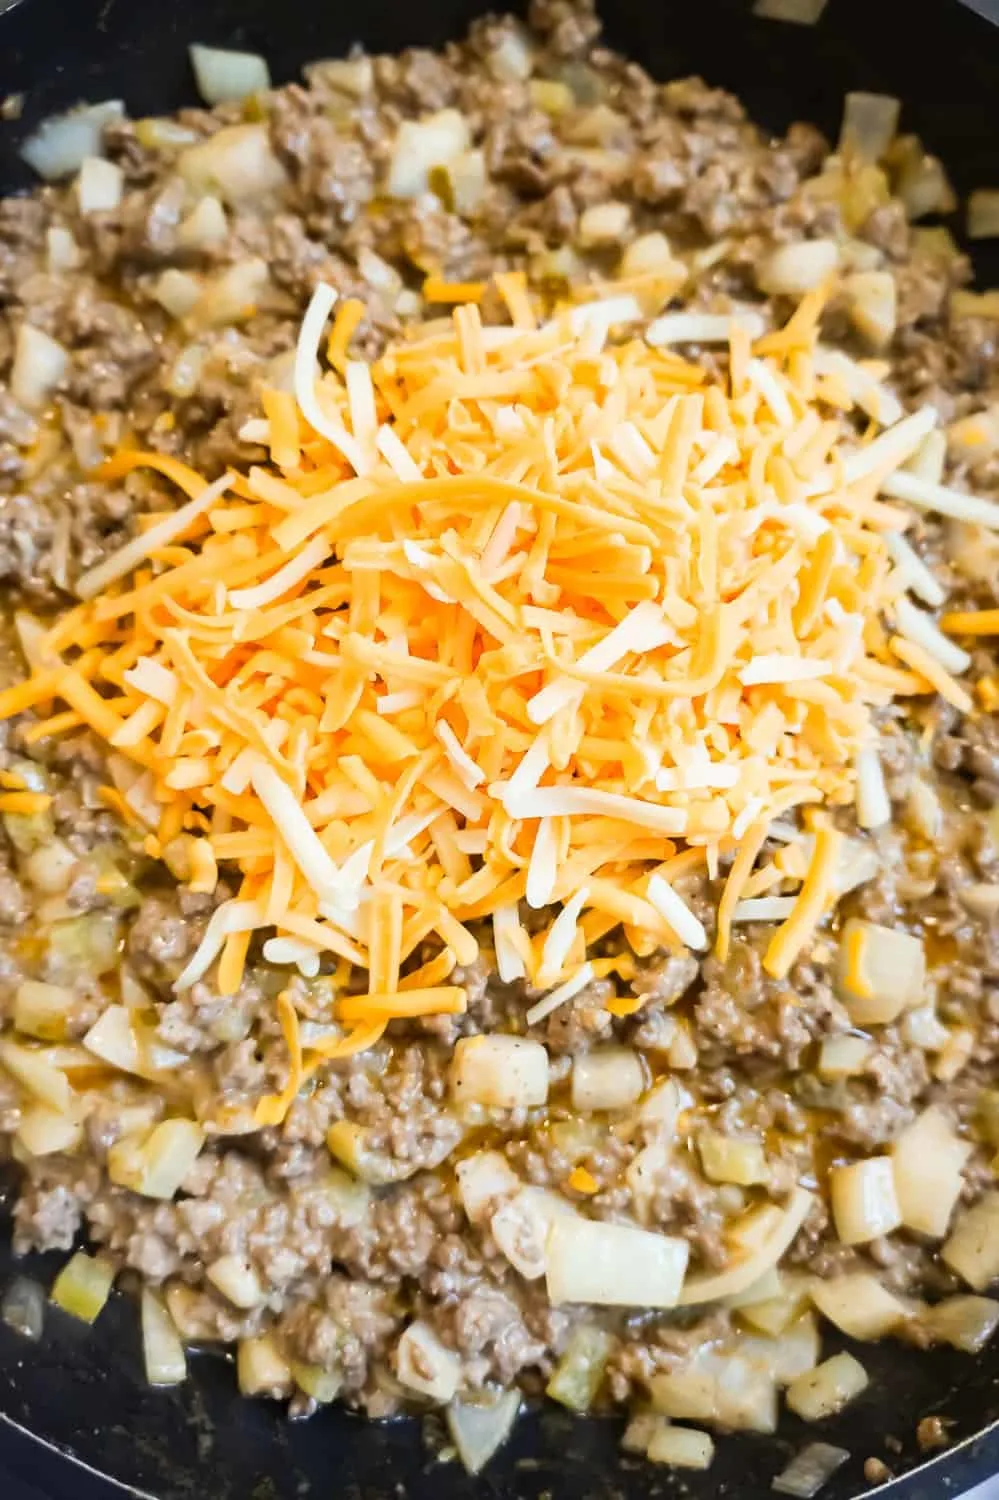 shredded cheddar cheese on top of ground beef mixture in a frying pan